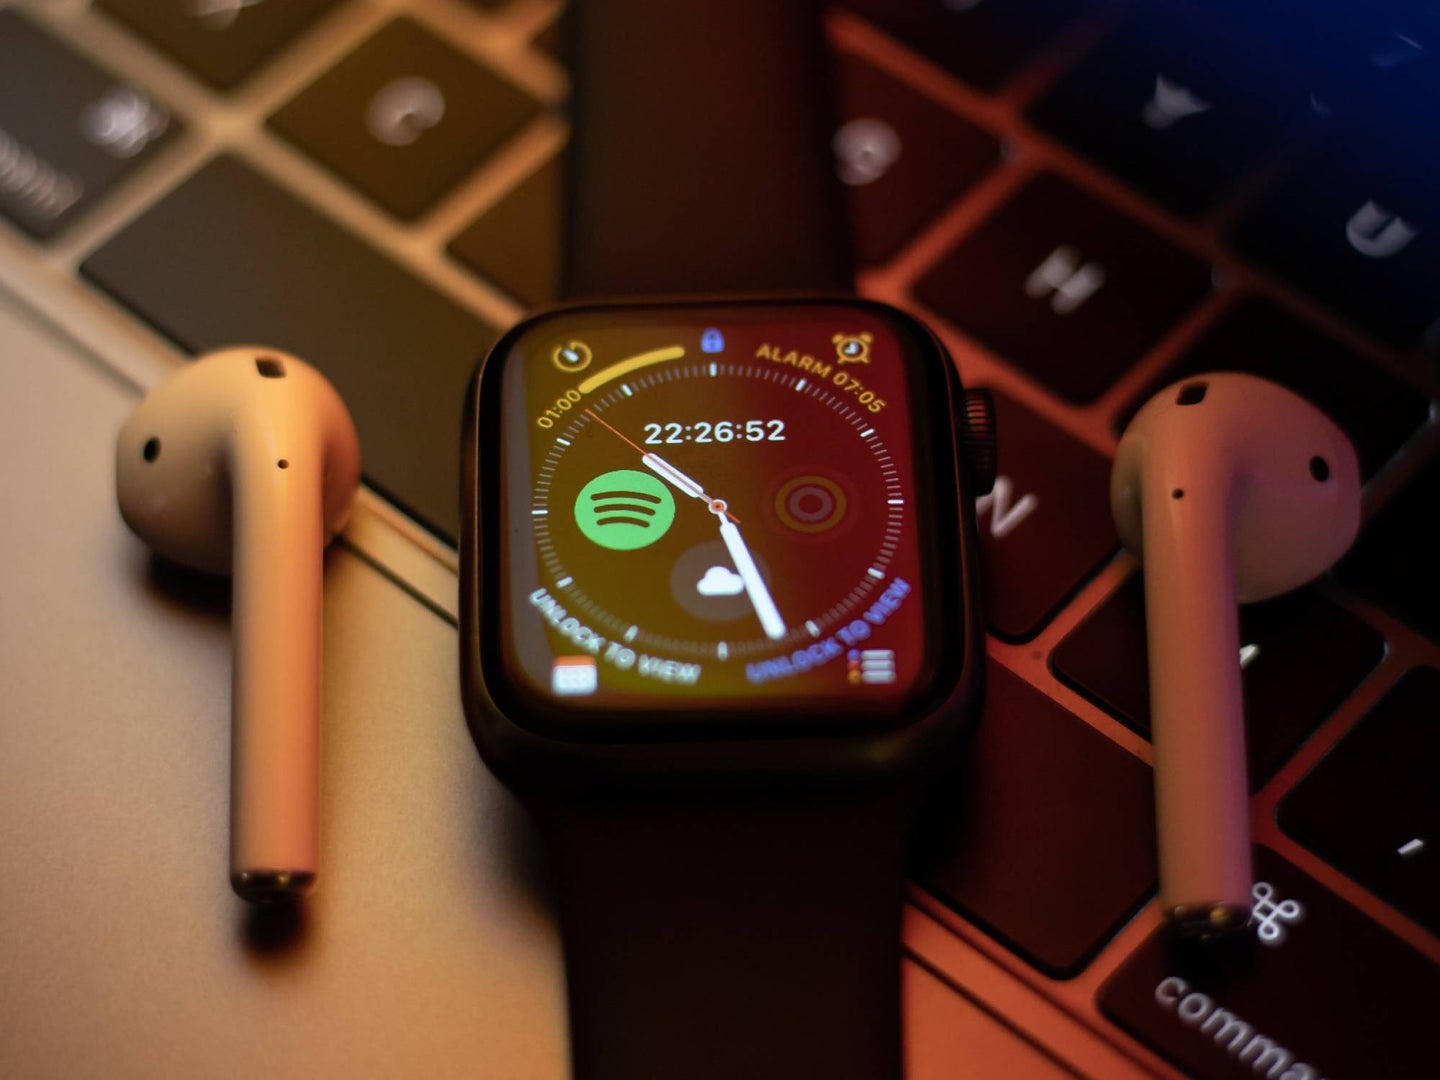 Apple watch on keyboard with airpods beside